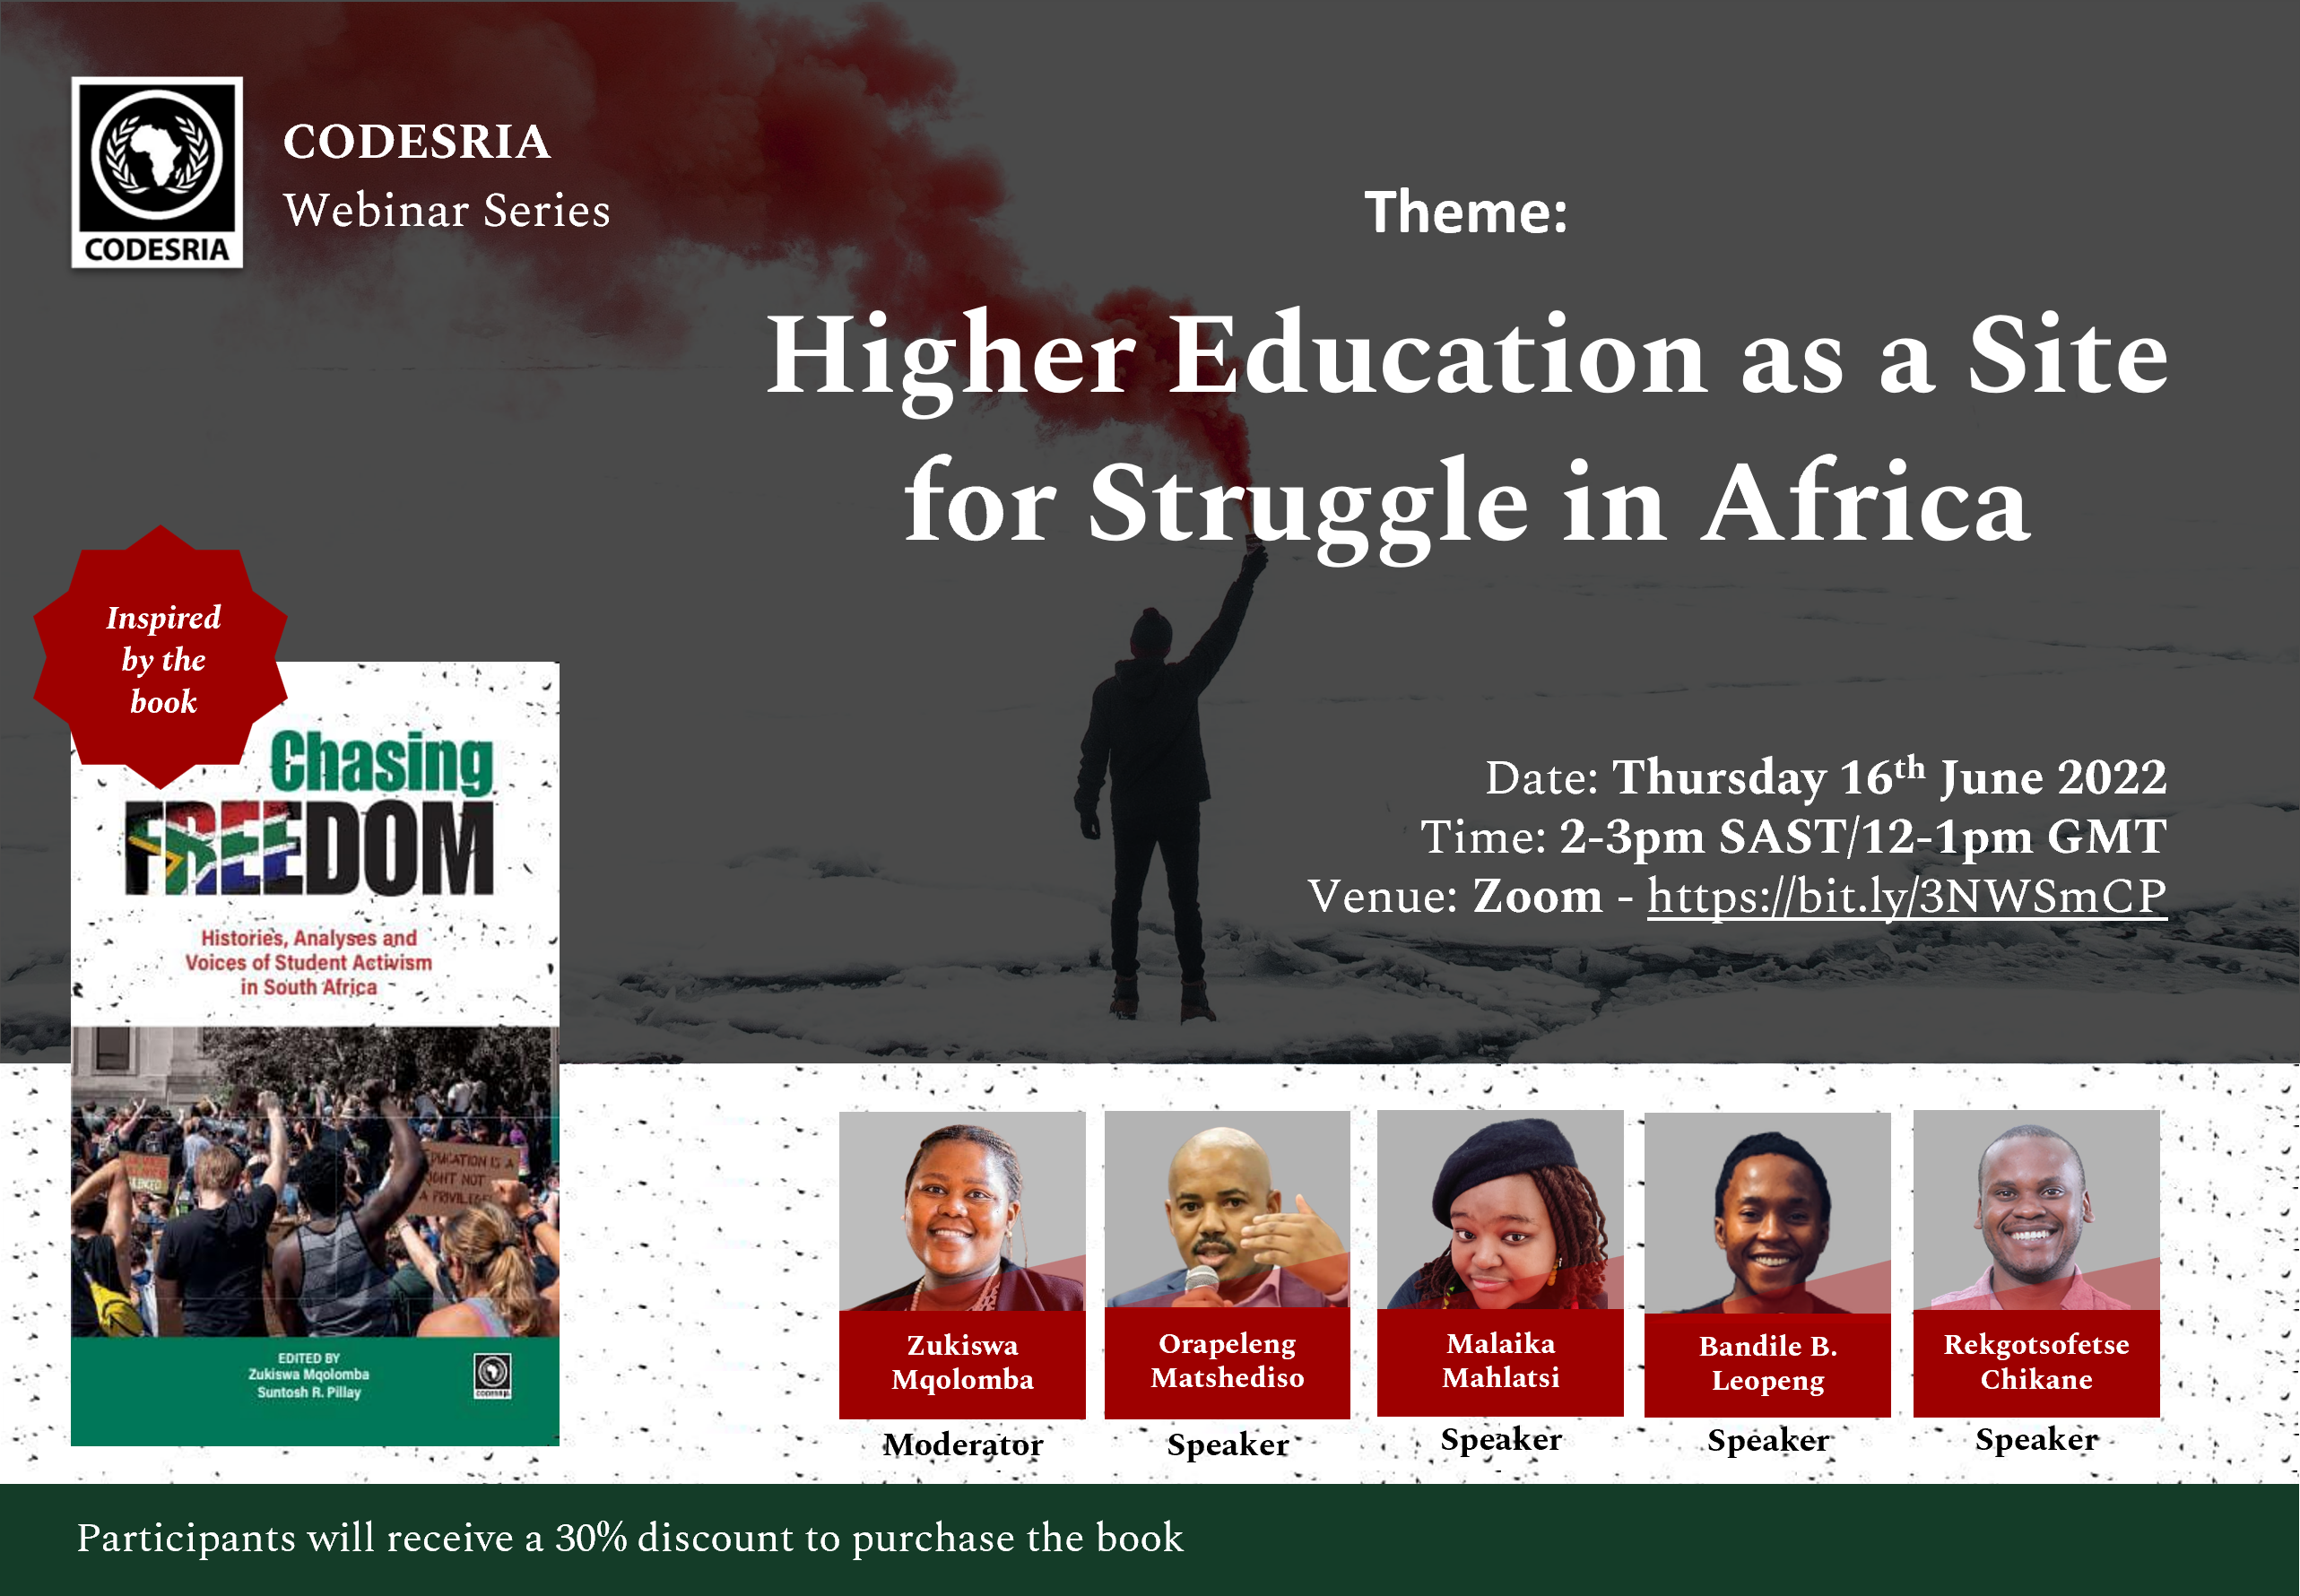 HIGHER EDUCATION AS A SITE FOR STRUGGLE IN AFRICA